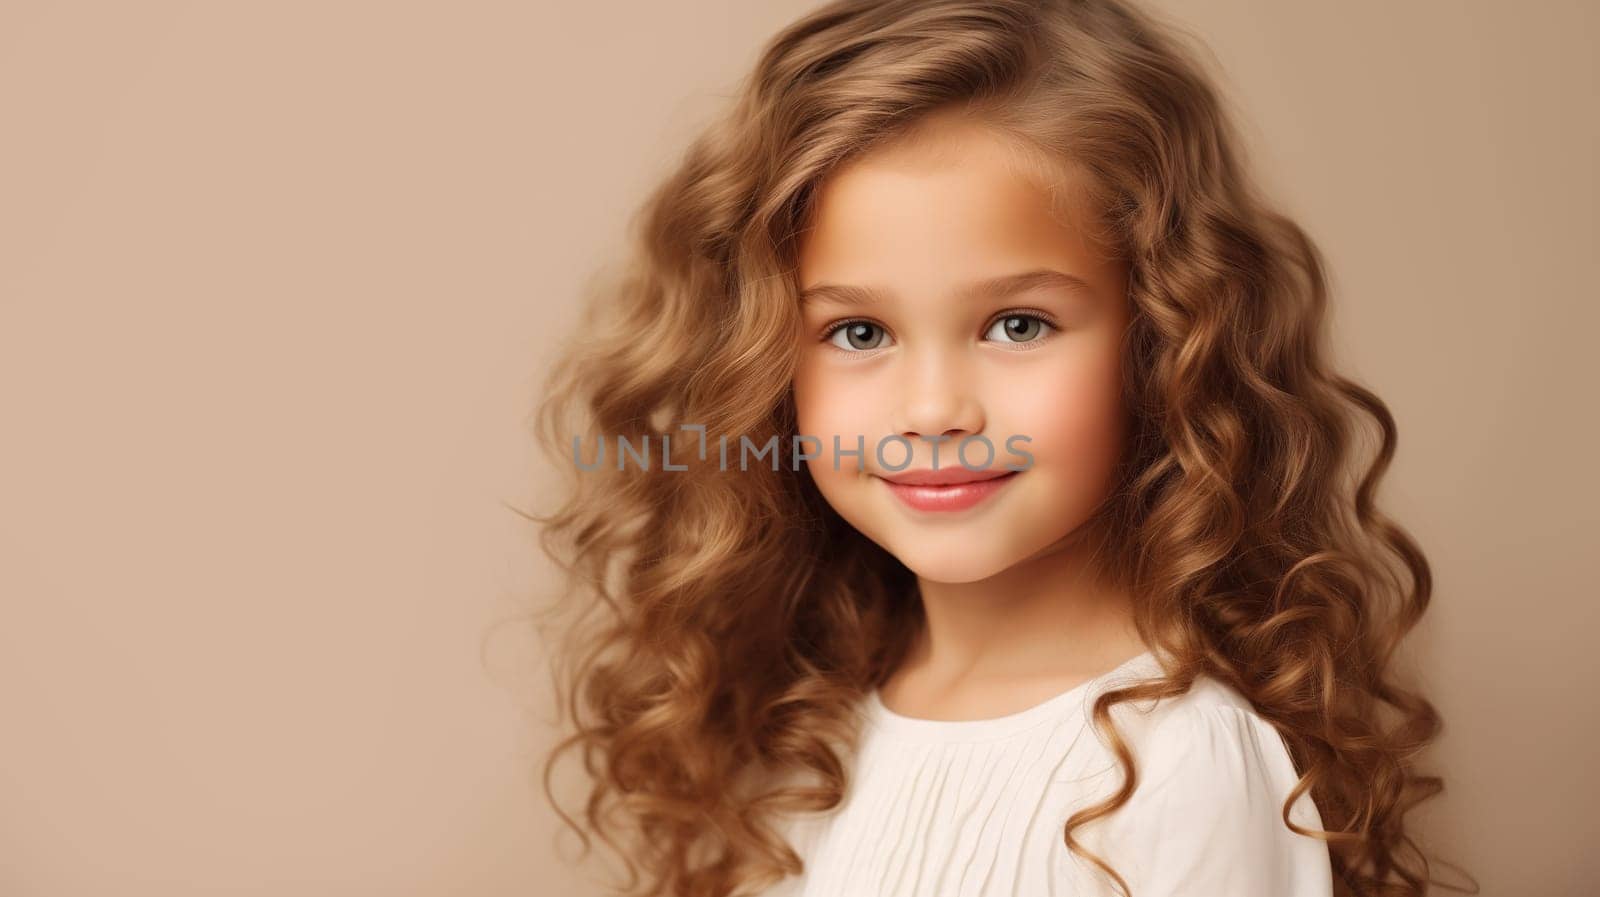 Beauty portrait of pretty little girl child looking at camera on beige background